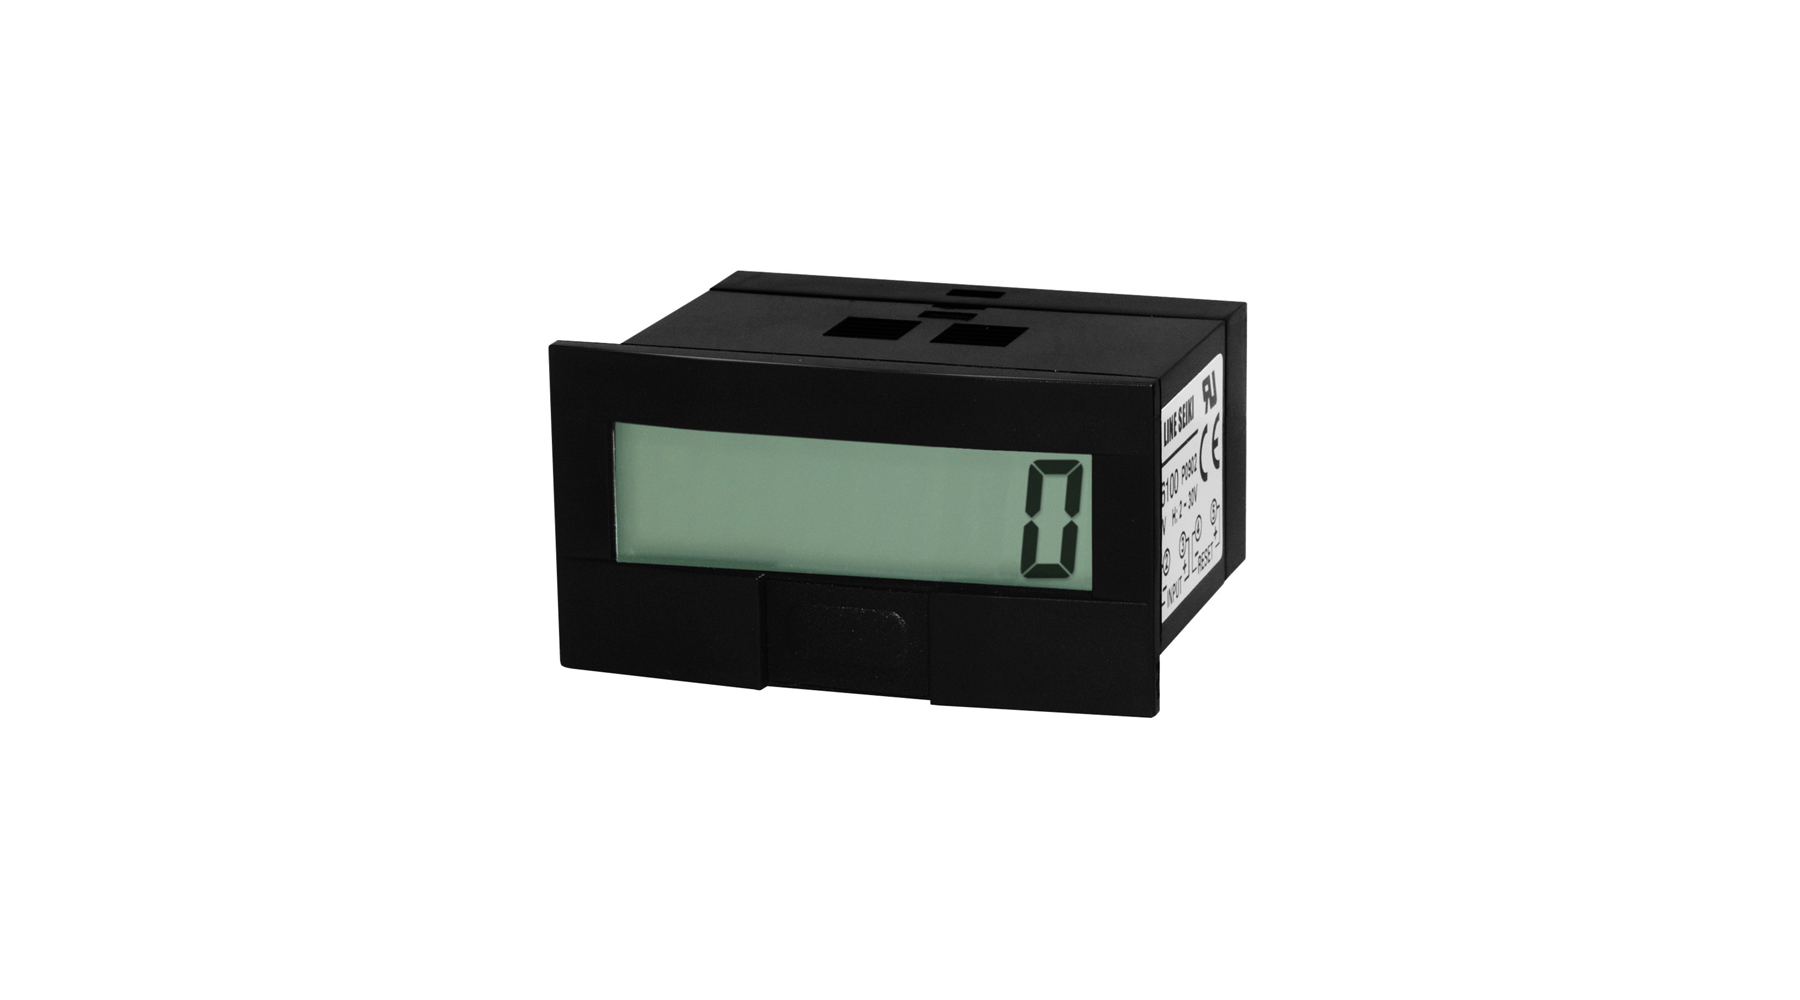 GC2 Series Electronic Counter (Total Counter)